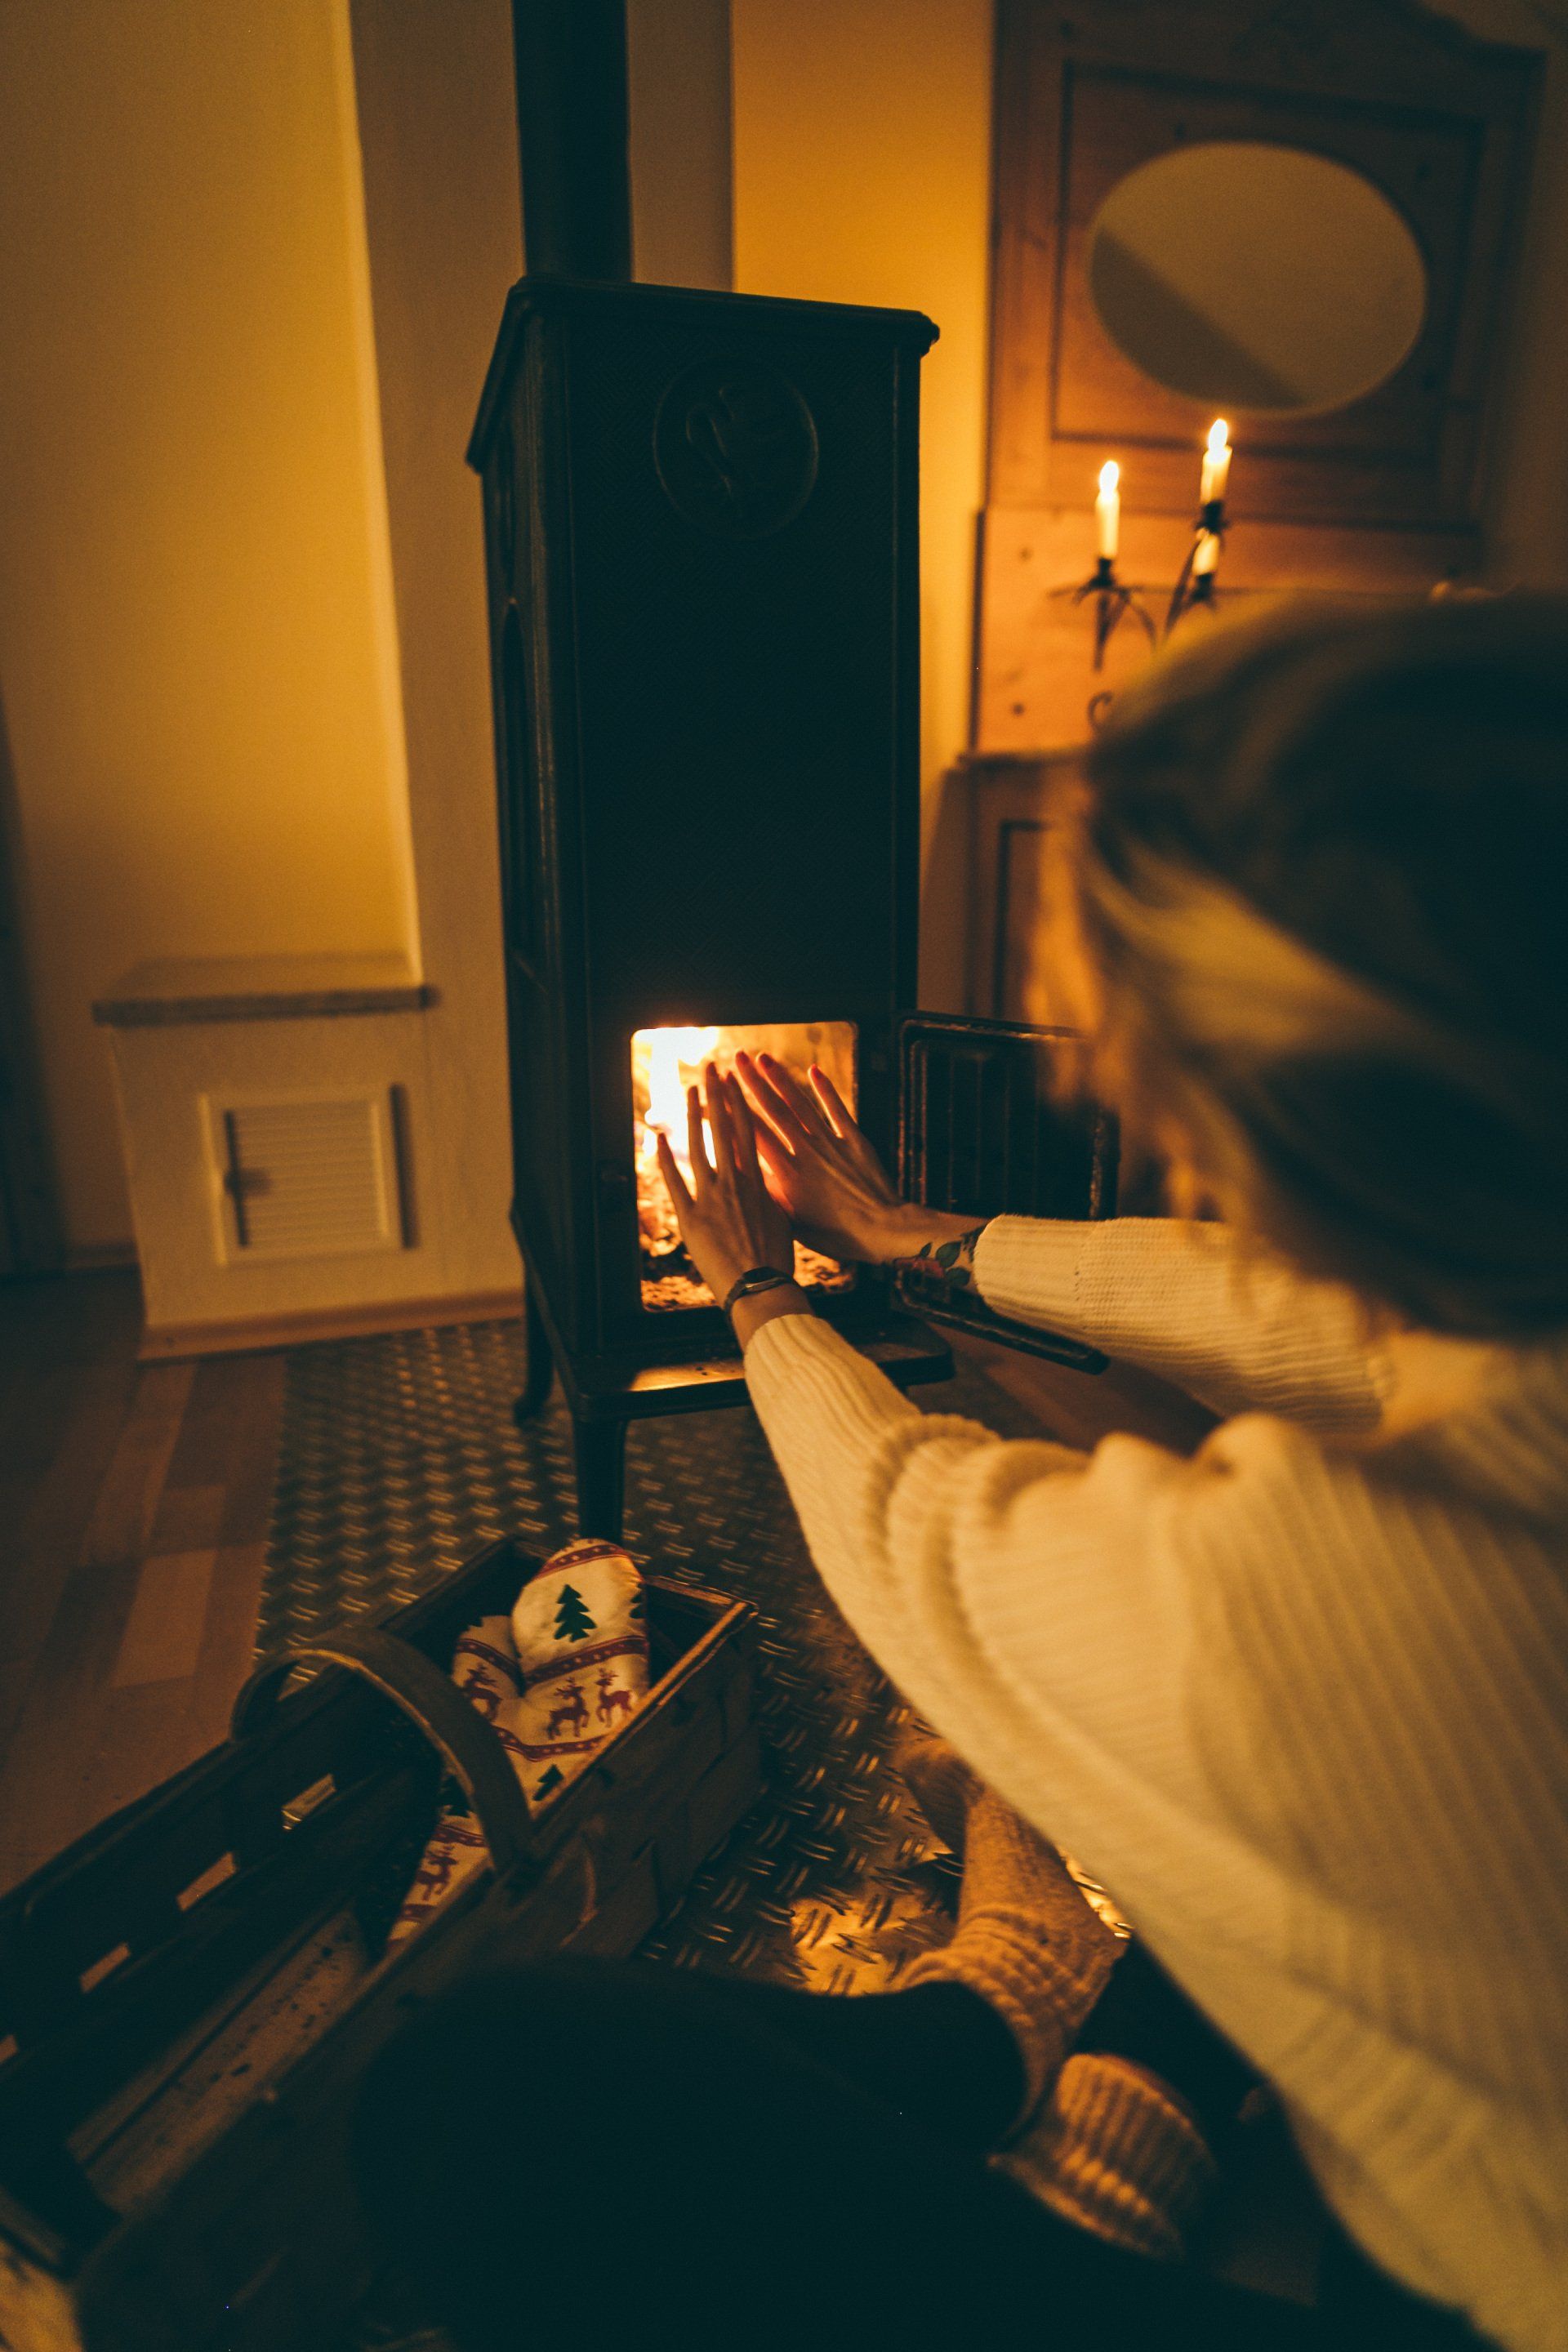 a person warming themself by the heater